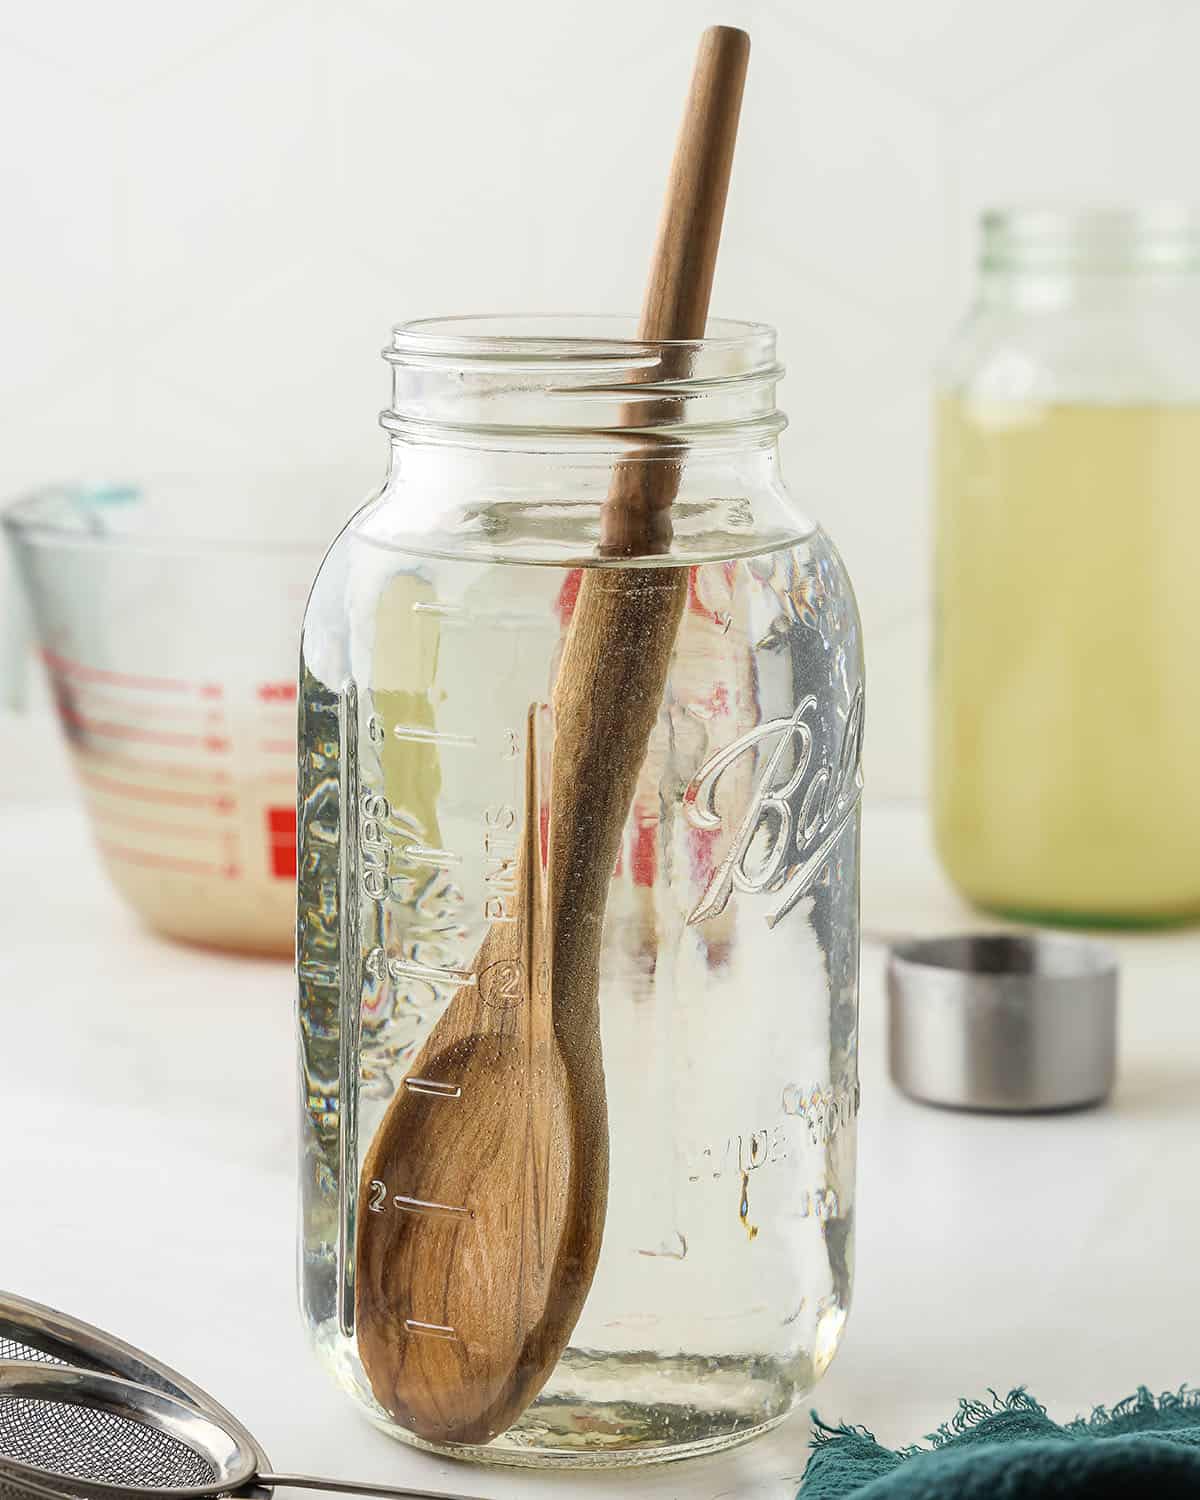 A wooden spoon stirring sugar into a jar of water.